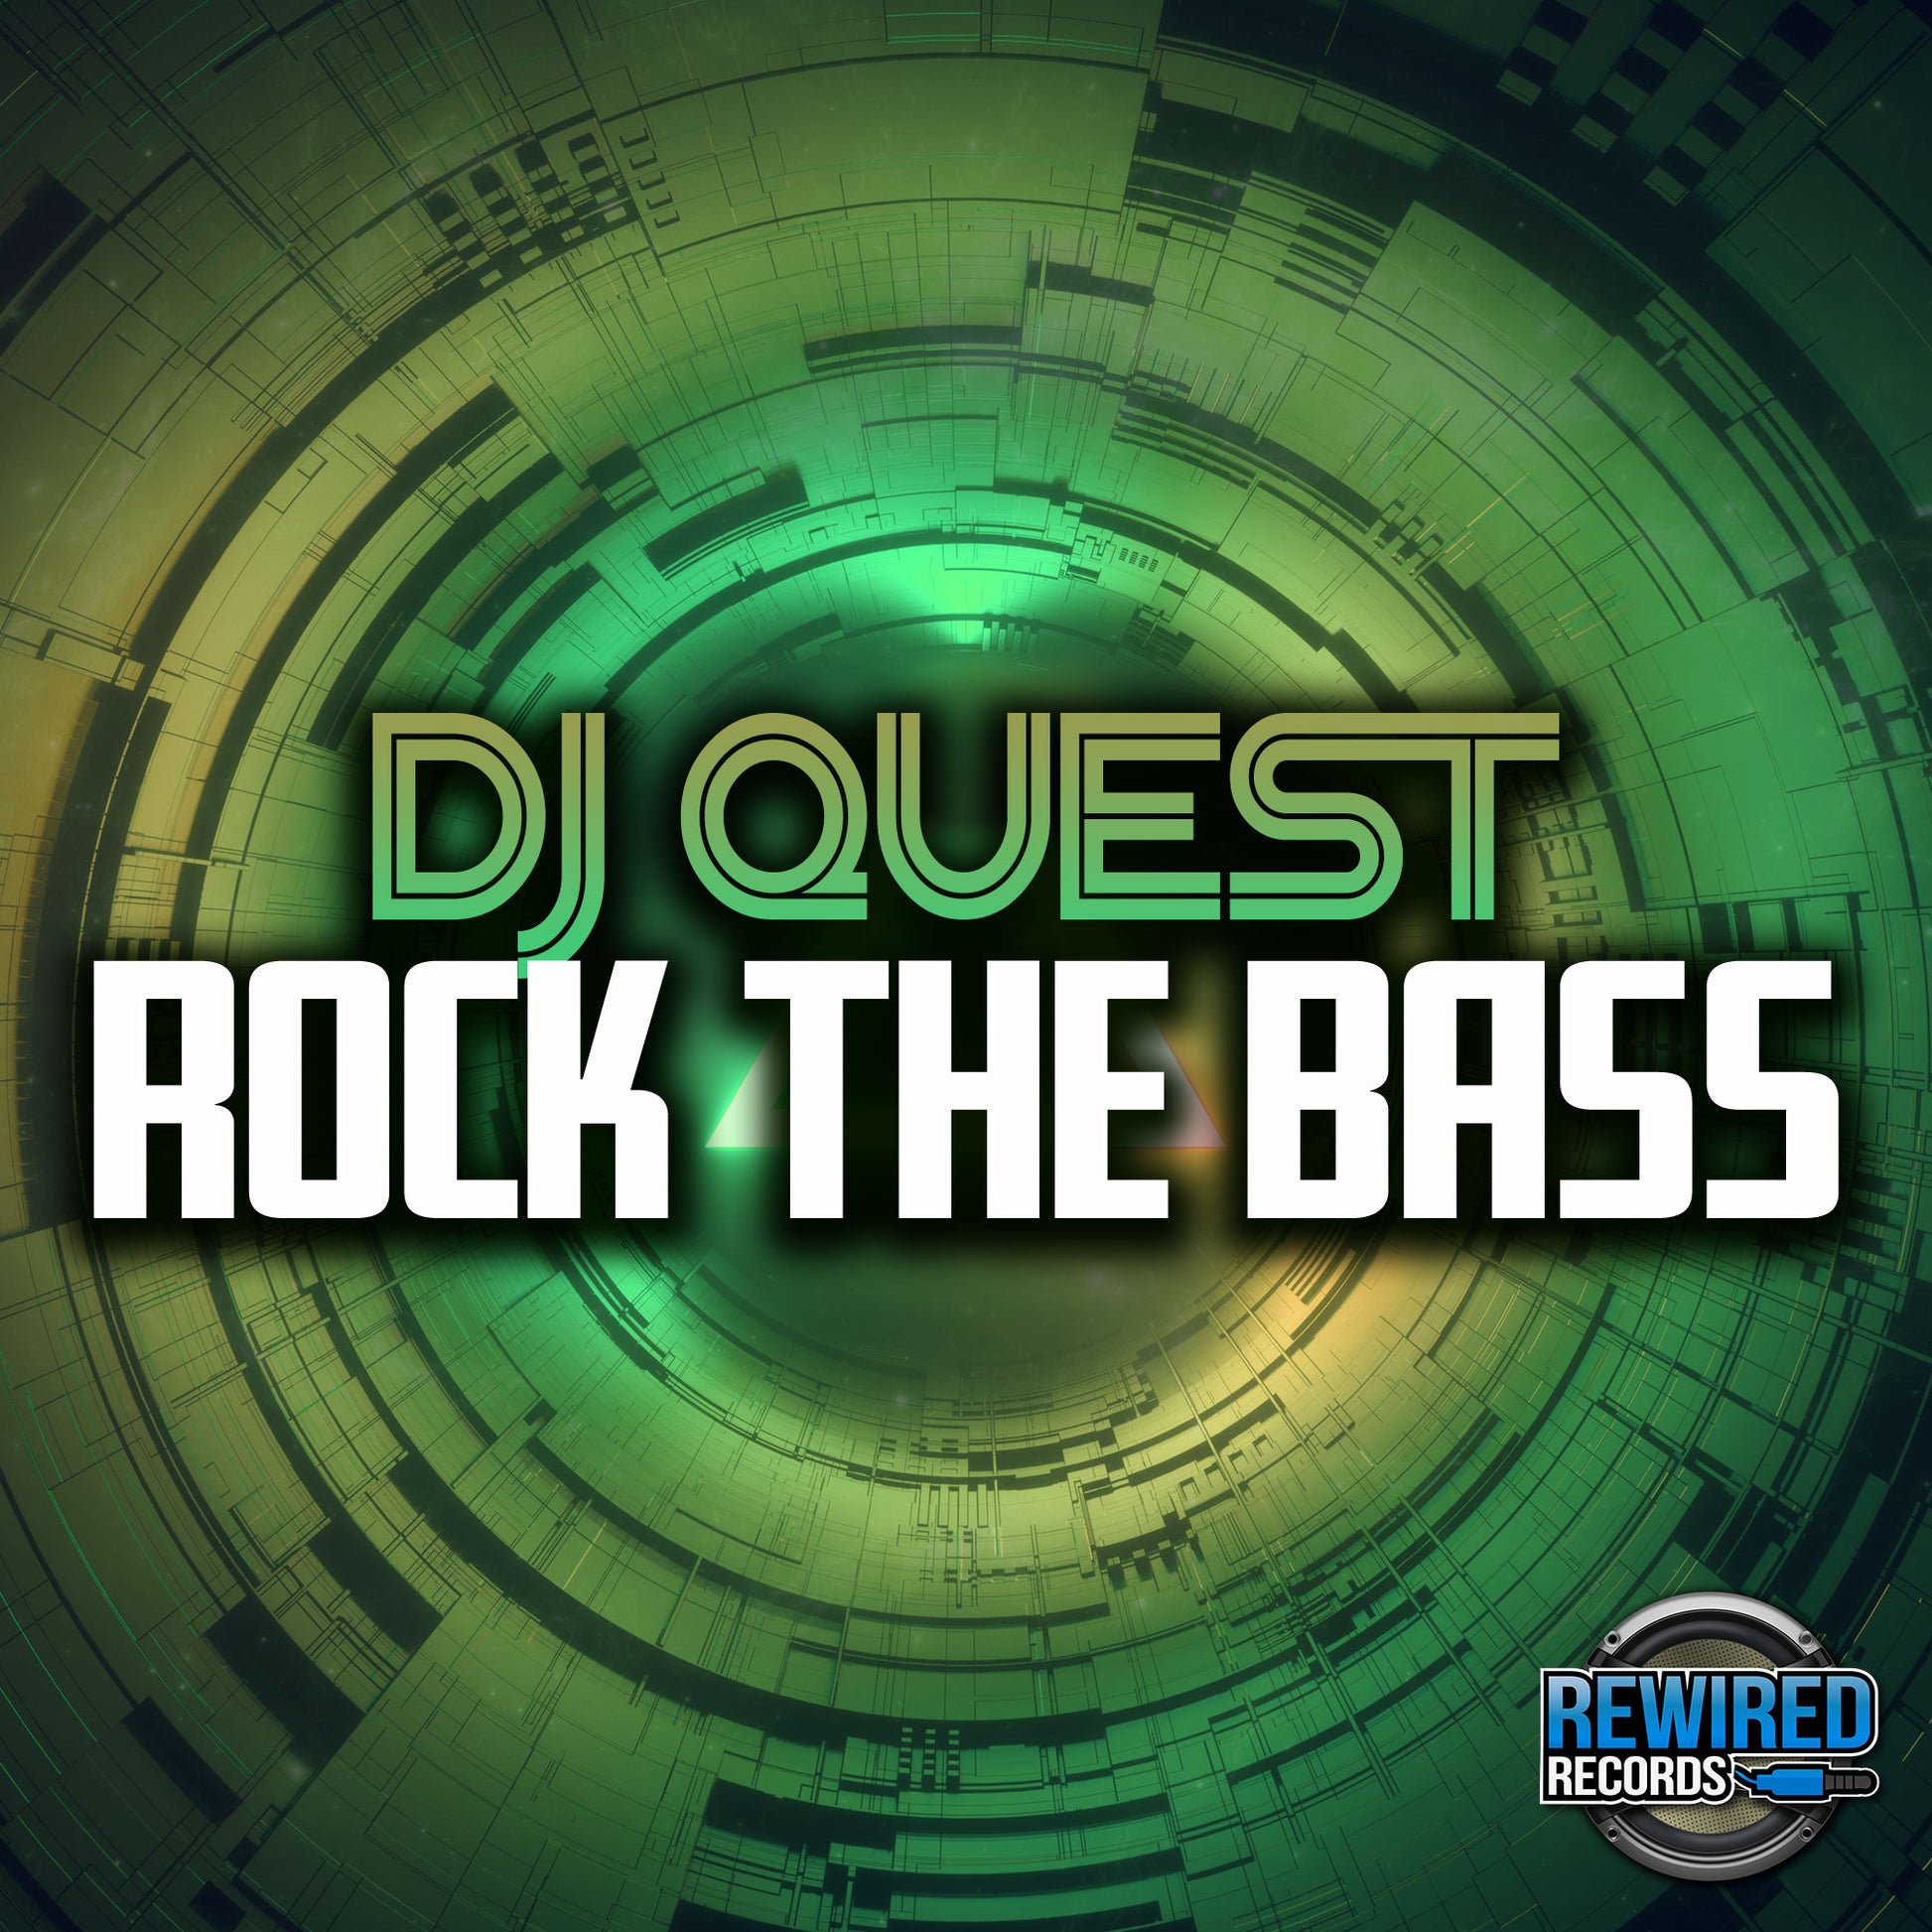 Quest - Rock The Bass - Rewired Records